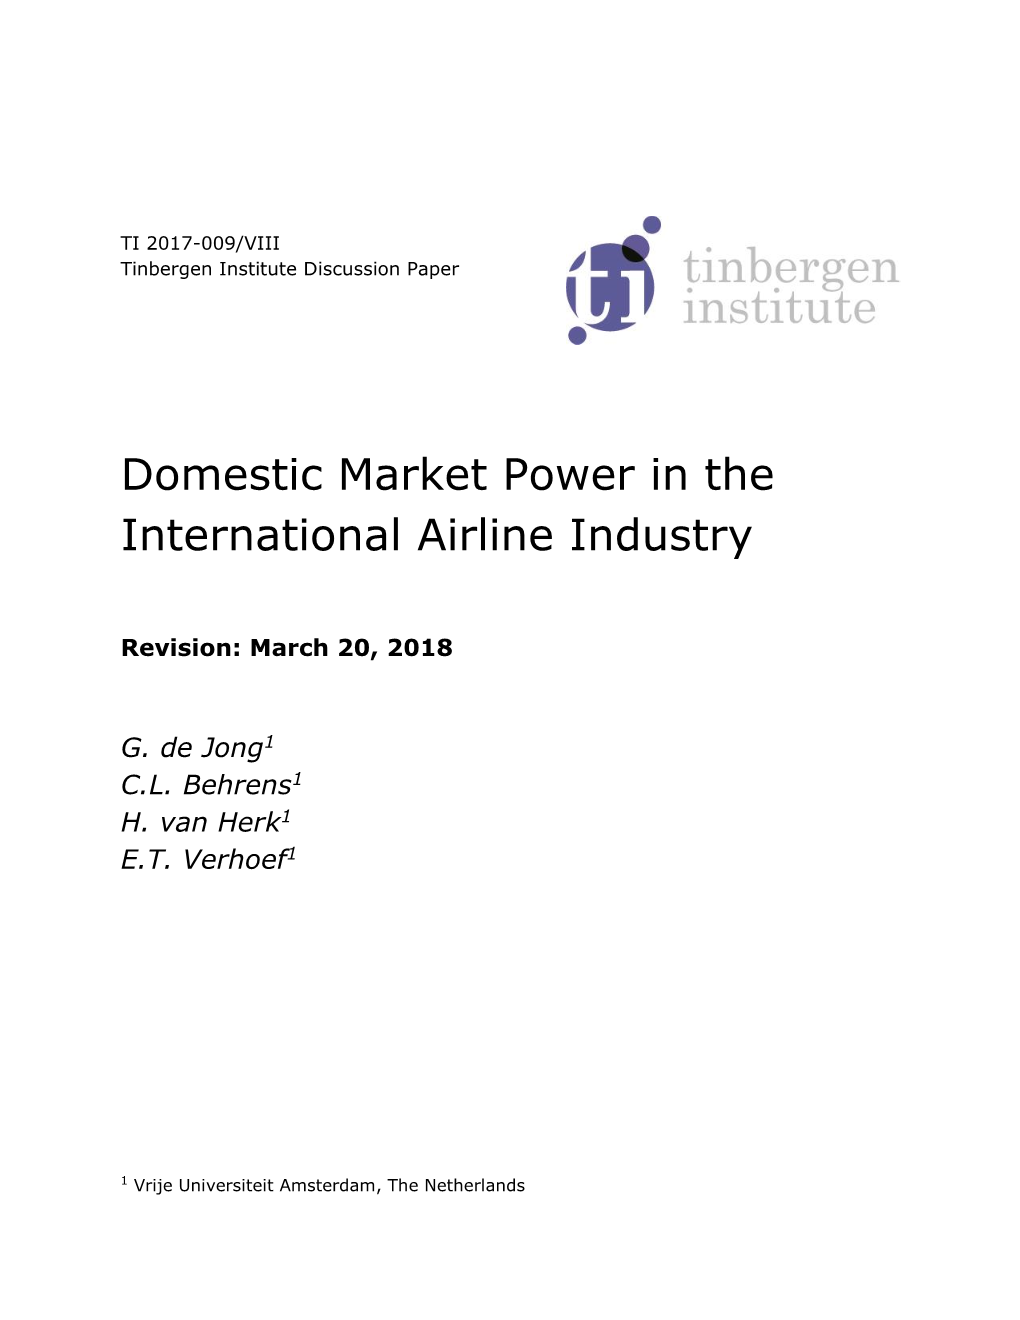 Domestic Market Power in the International Airline Industry